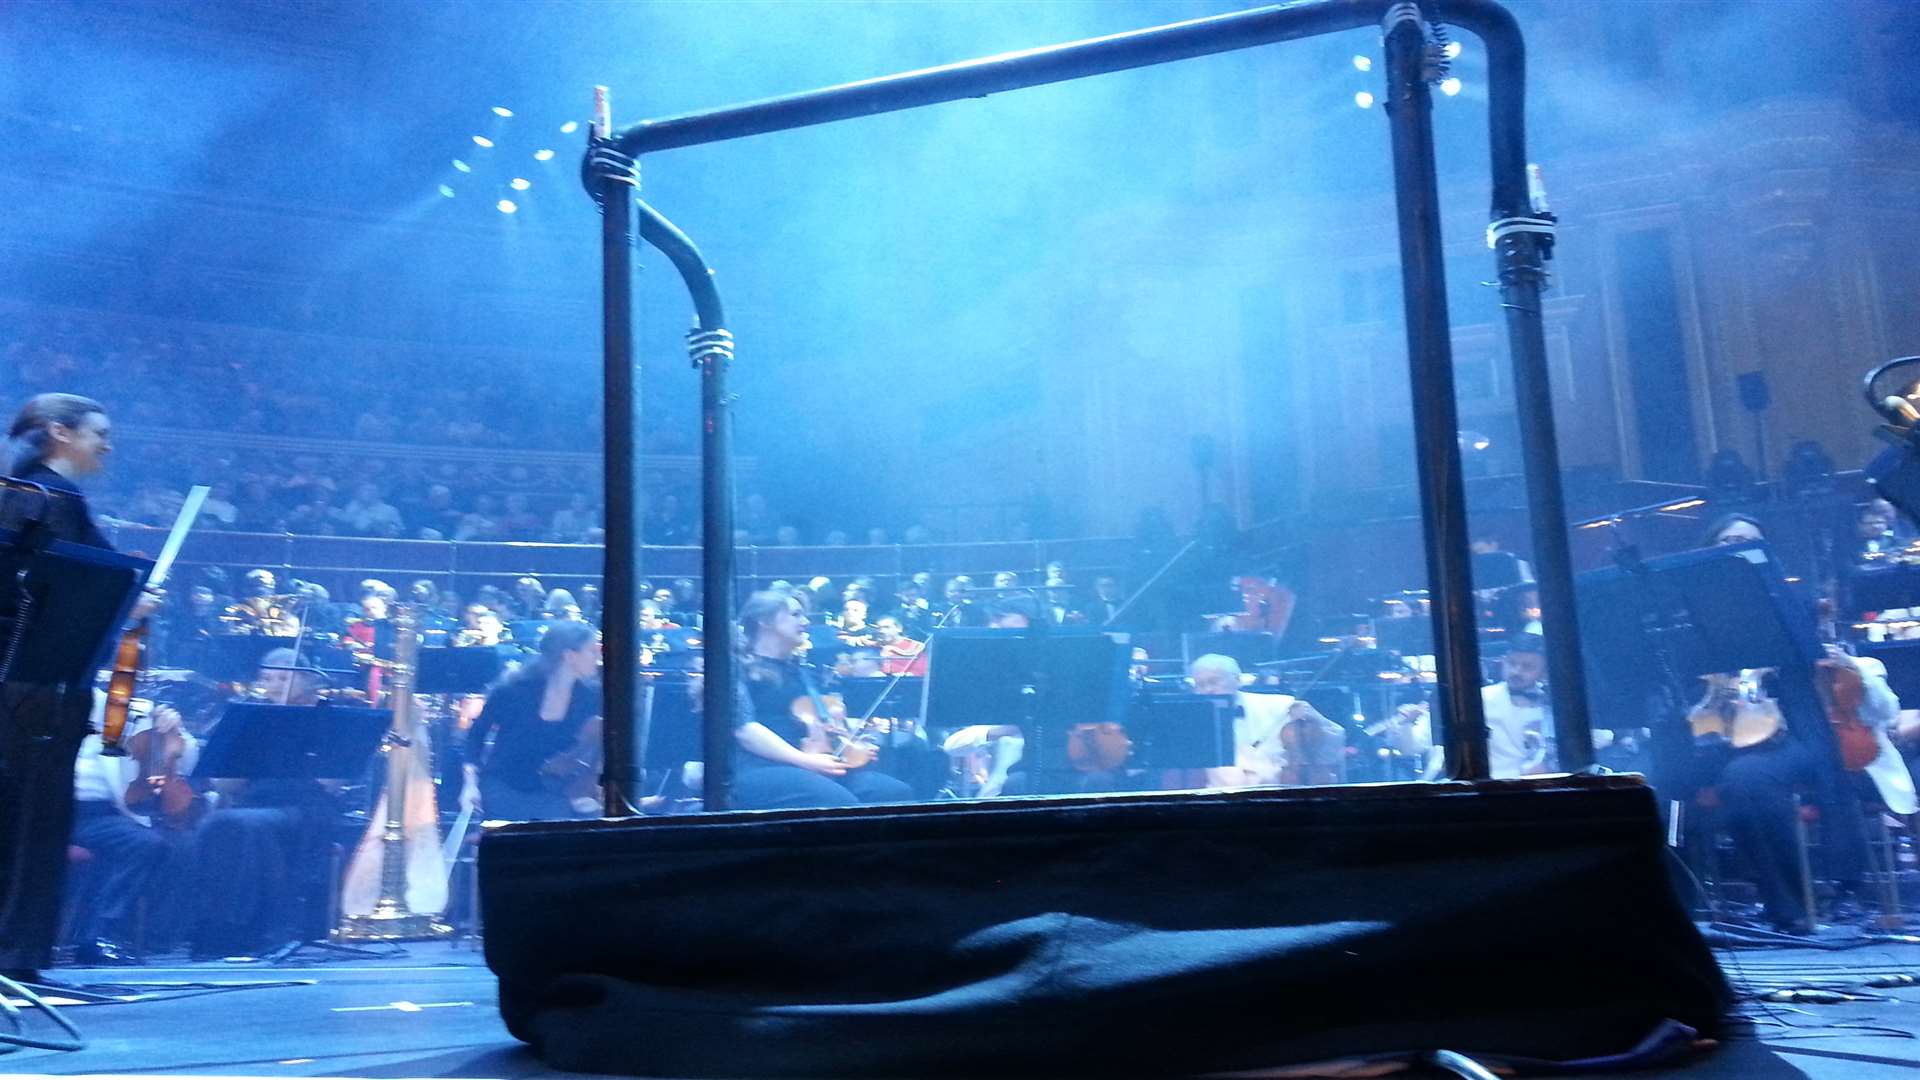 Our close-up view at the Royal Albert Hall